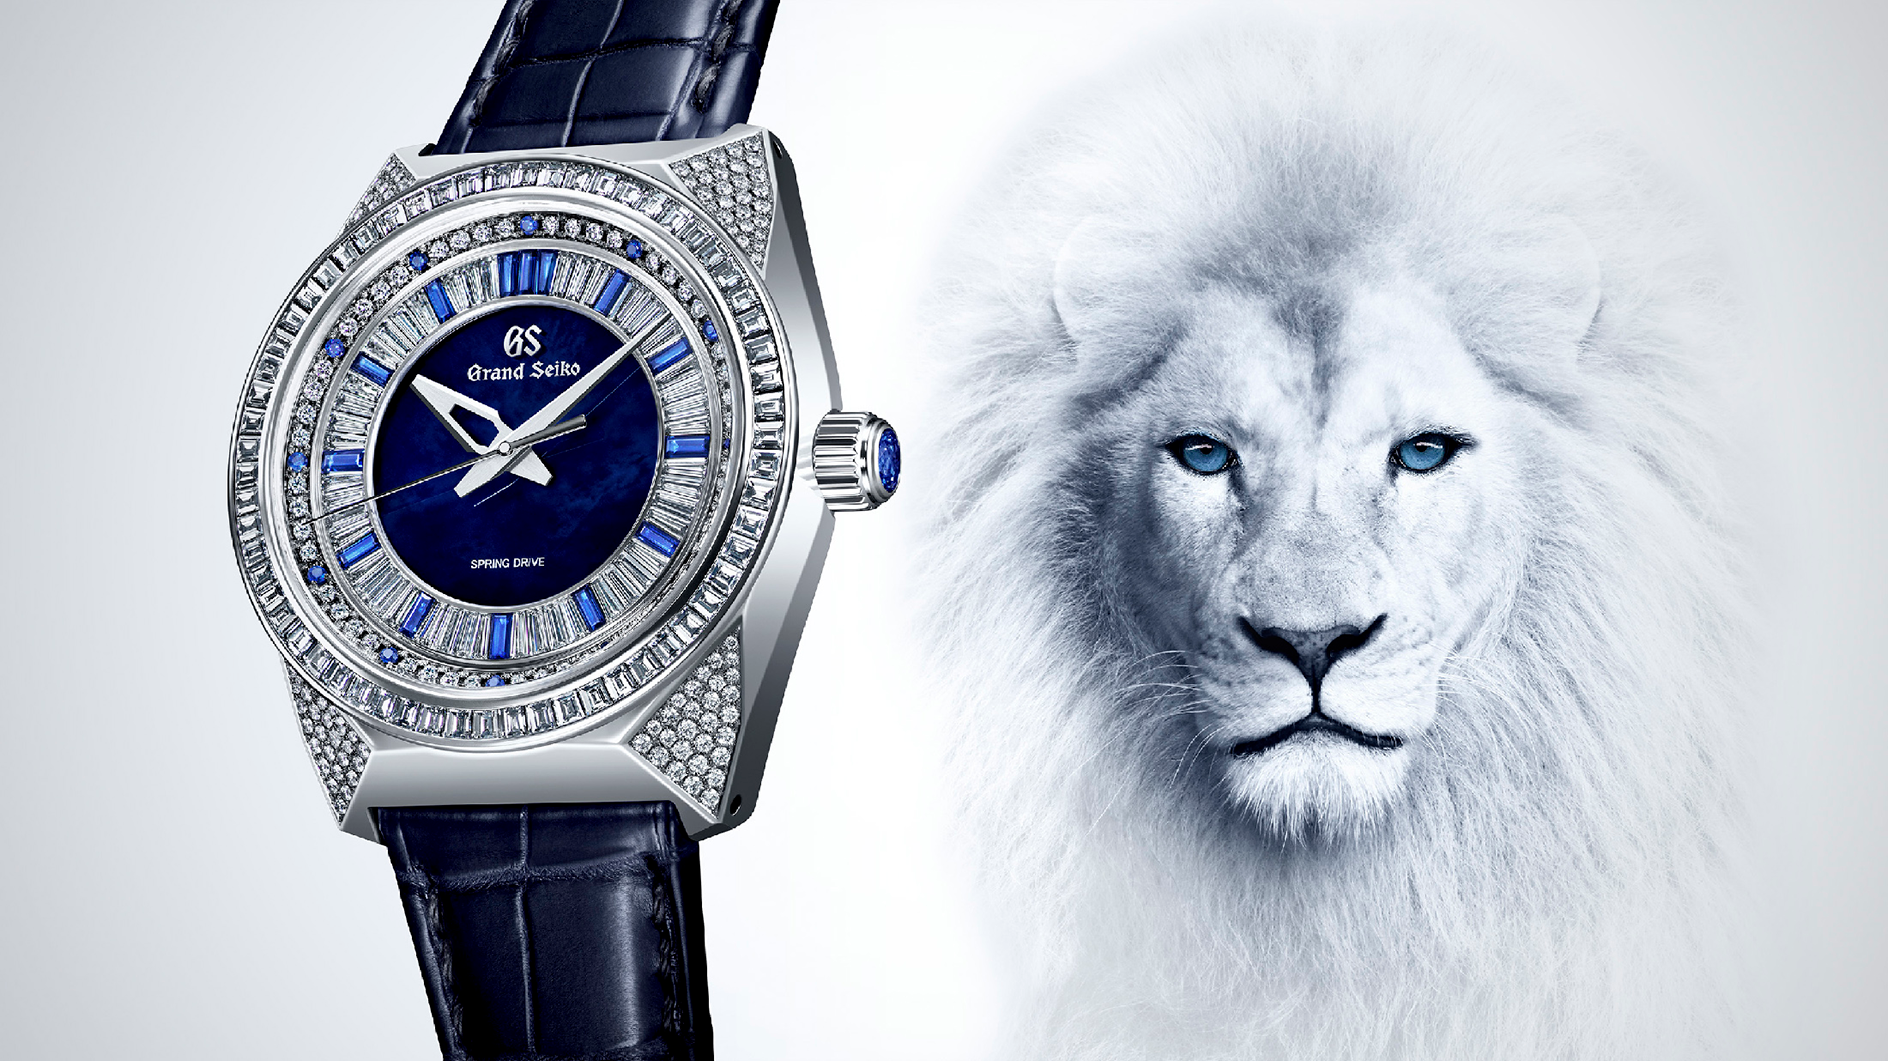 Grand Seiko - Diamonds, blue sapphires, and Platinum 950. A new Grand Seiko jewelry masterpiece inspired by the white lion.